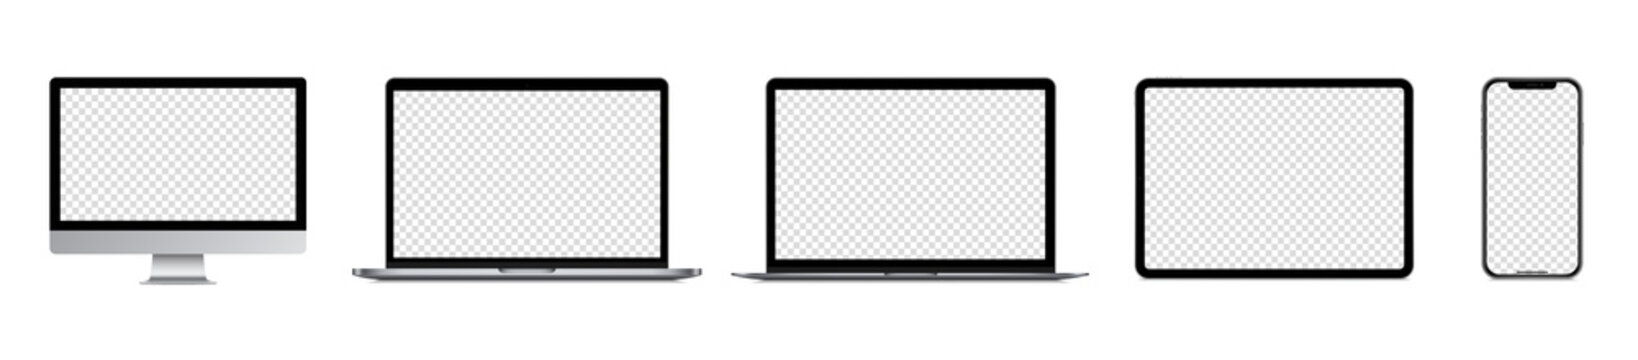 Realistic silver devices mockup vector set : Isolated smartphone, phone, laptop computer, tablet,  monitor, on white background. Editable empty screen device. Vector  illustration.